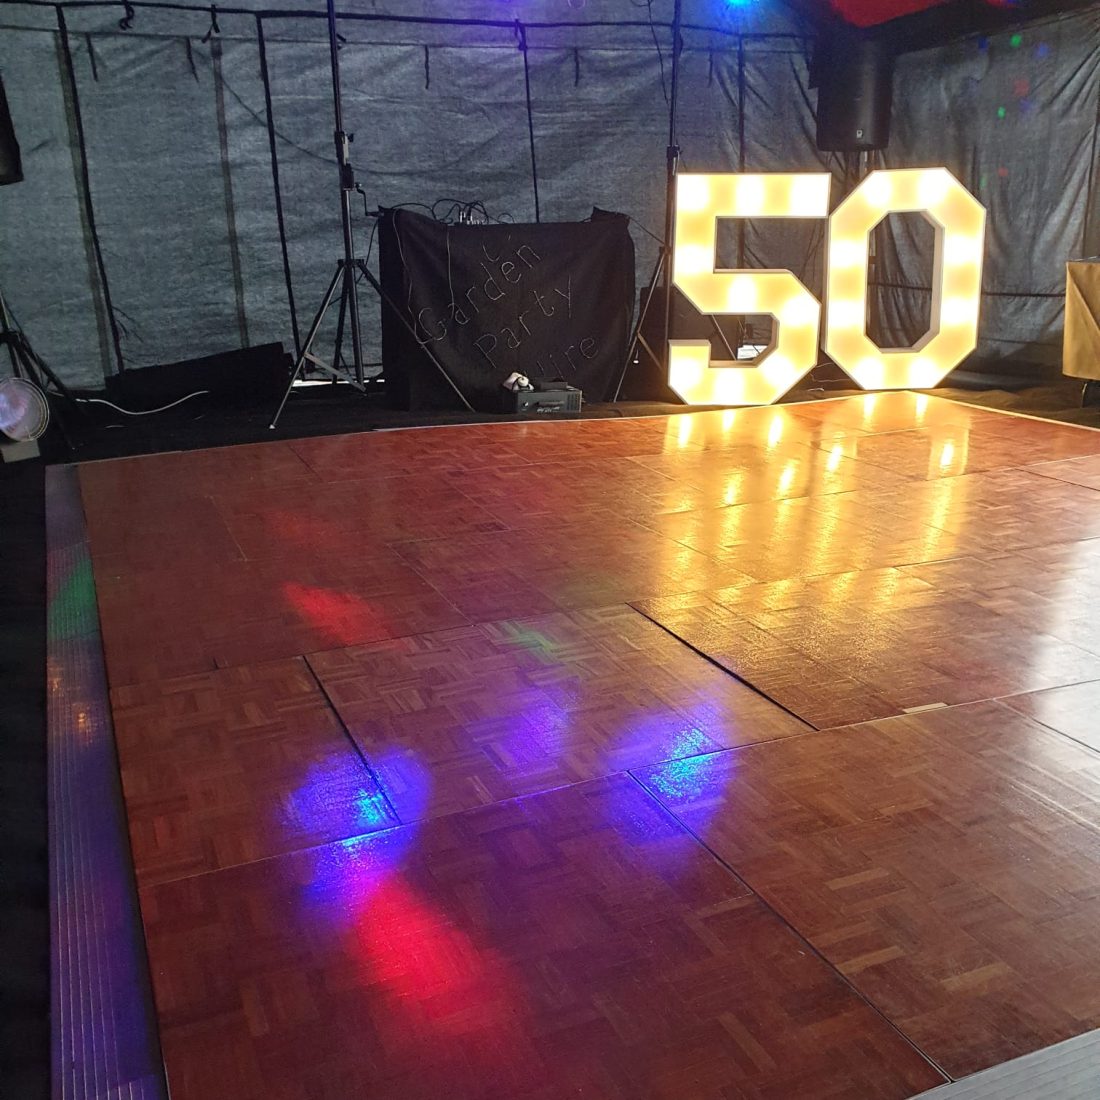 50th birthday party in a marquee with full disco rig, lights, lasers and dance floor